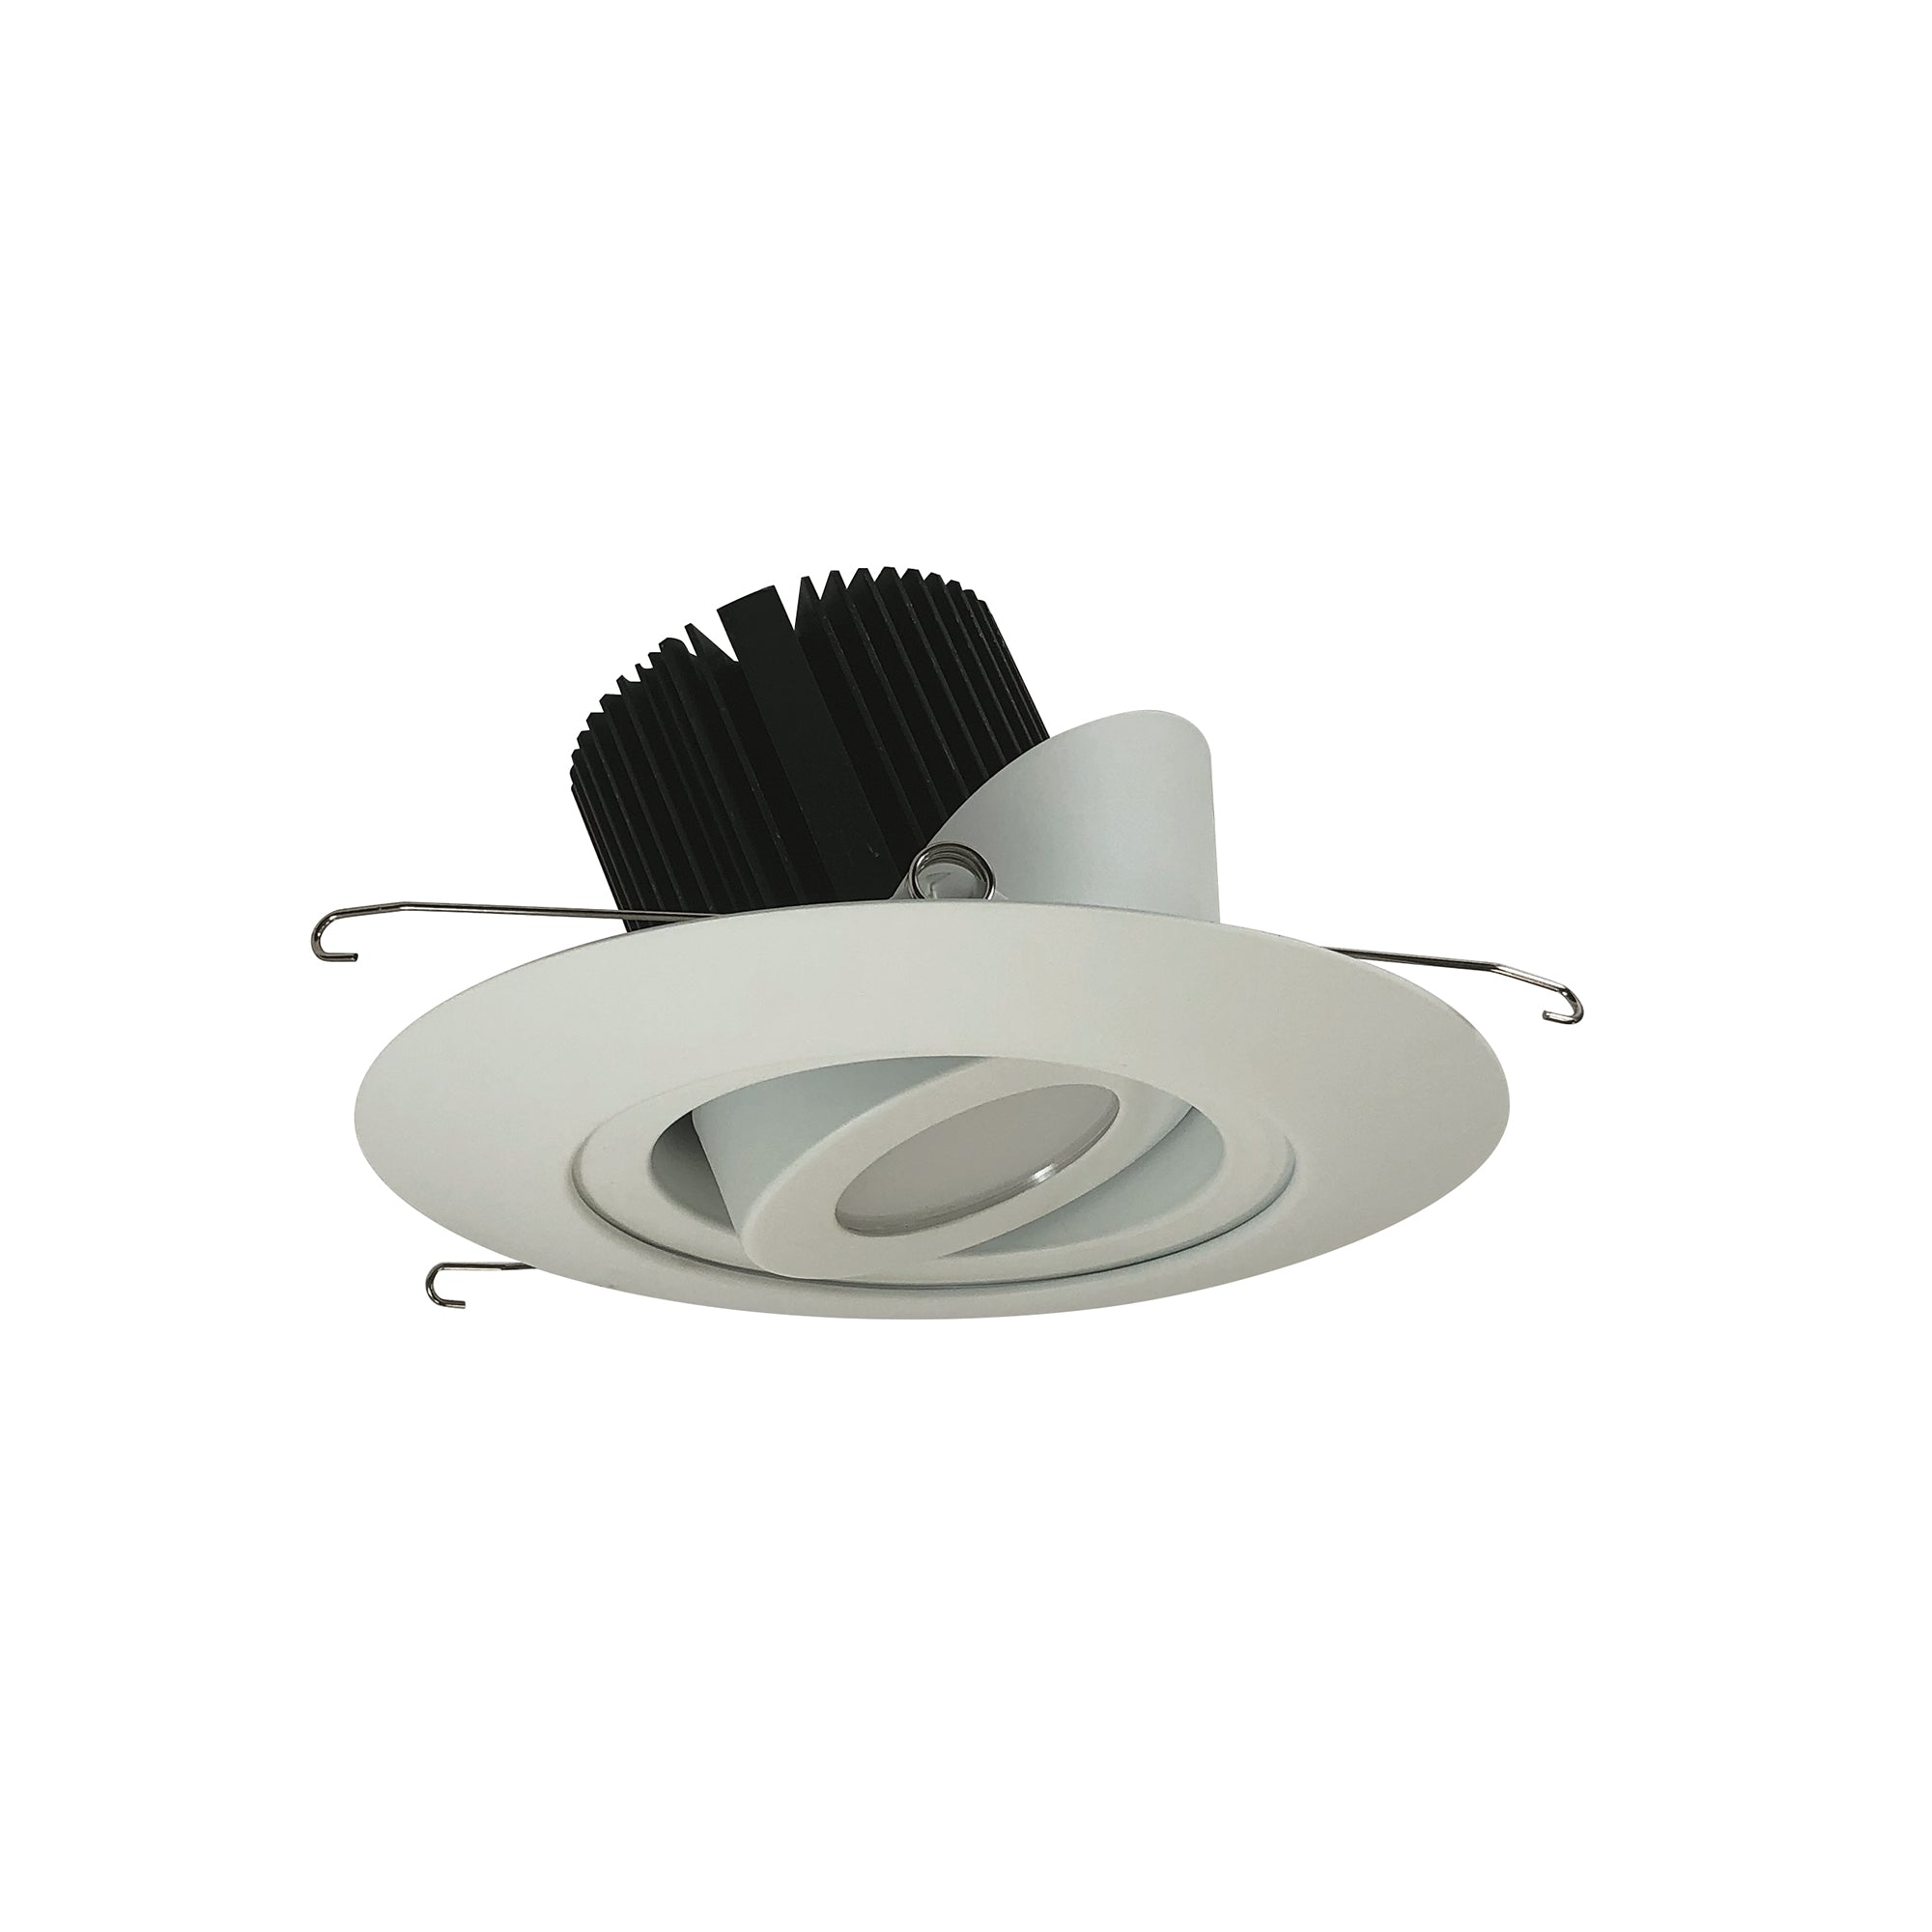 Nora Lighting NRM2-614L2530MWW - Recessed - 6 Inch Marquise II Round Surface Adjustable Trim, Medium Flood, 2500lm, 3000K, White (Not Compatible with NHRM2-625 Housings)